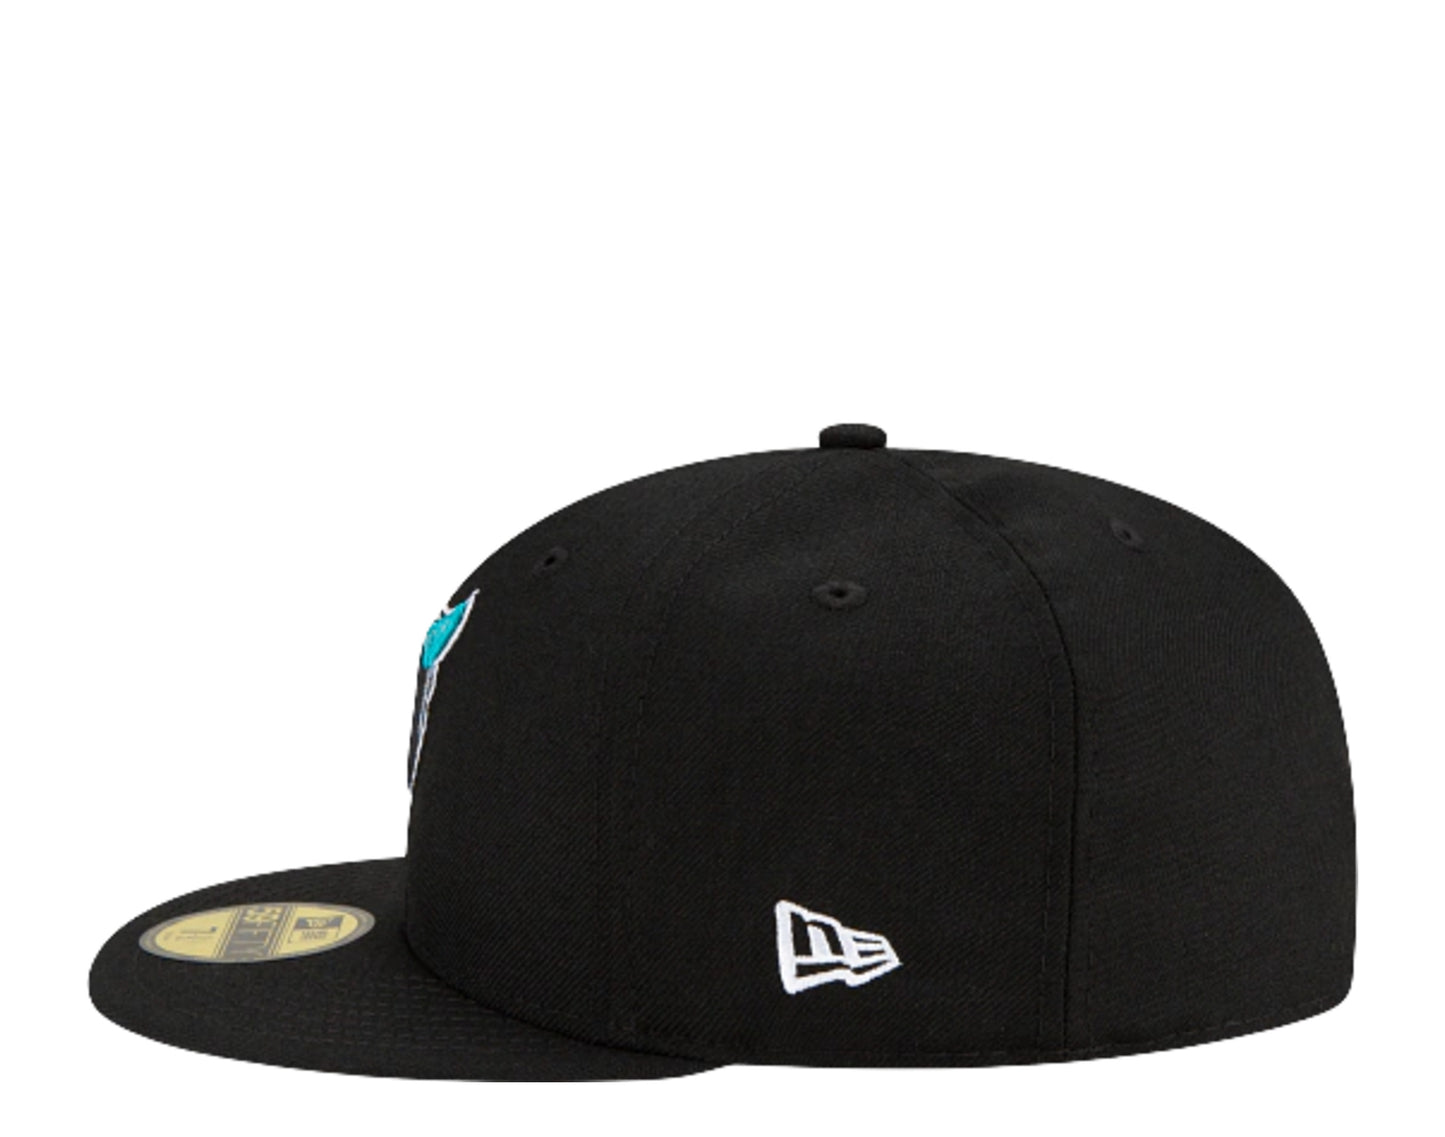 New Era 59Fifty MLB Florida Marlins Upside Down Logo Fitted Hat